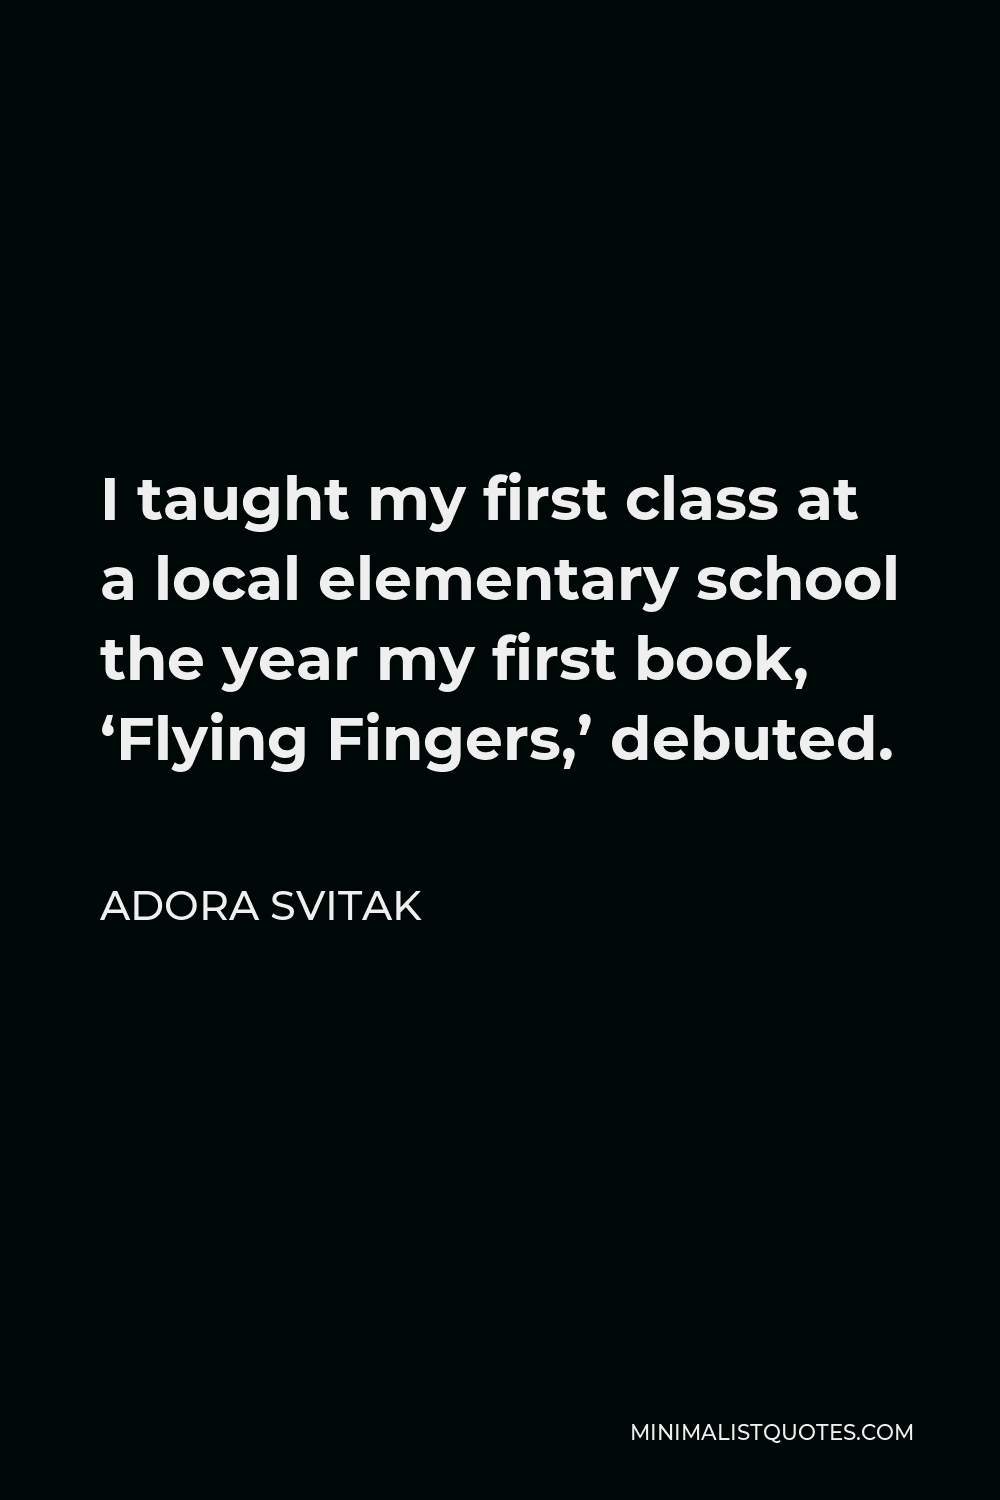 Adora Svitak Quote - I taught my first class at a local elementary school the year my first book, ‘Flying Fingers,’ debuted.